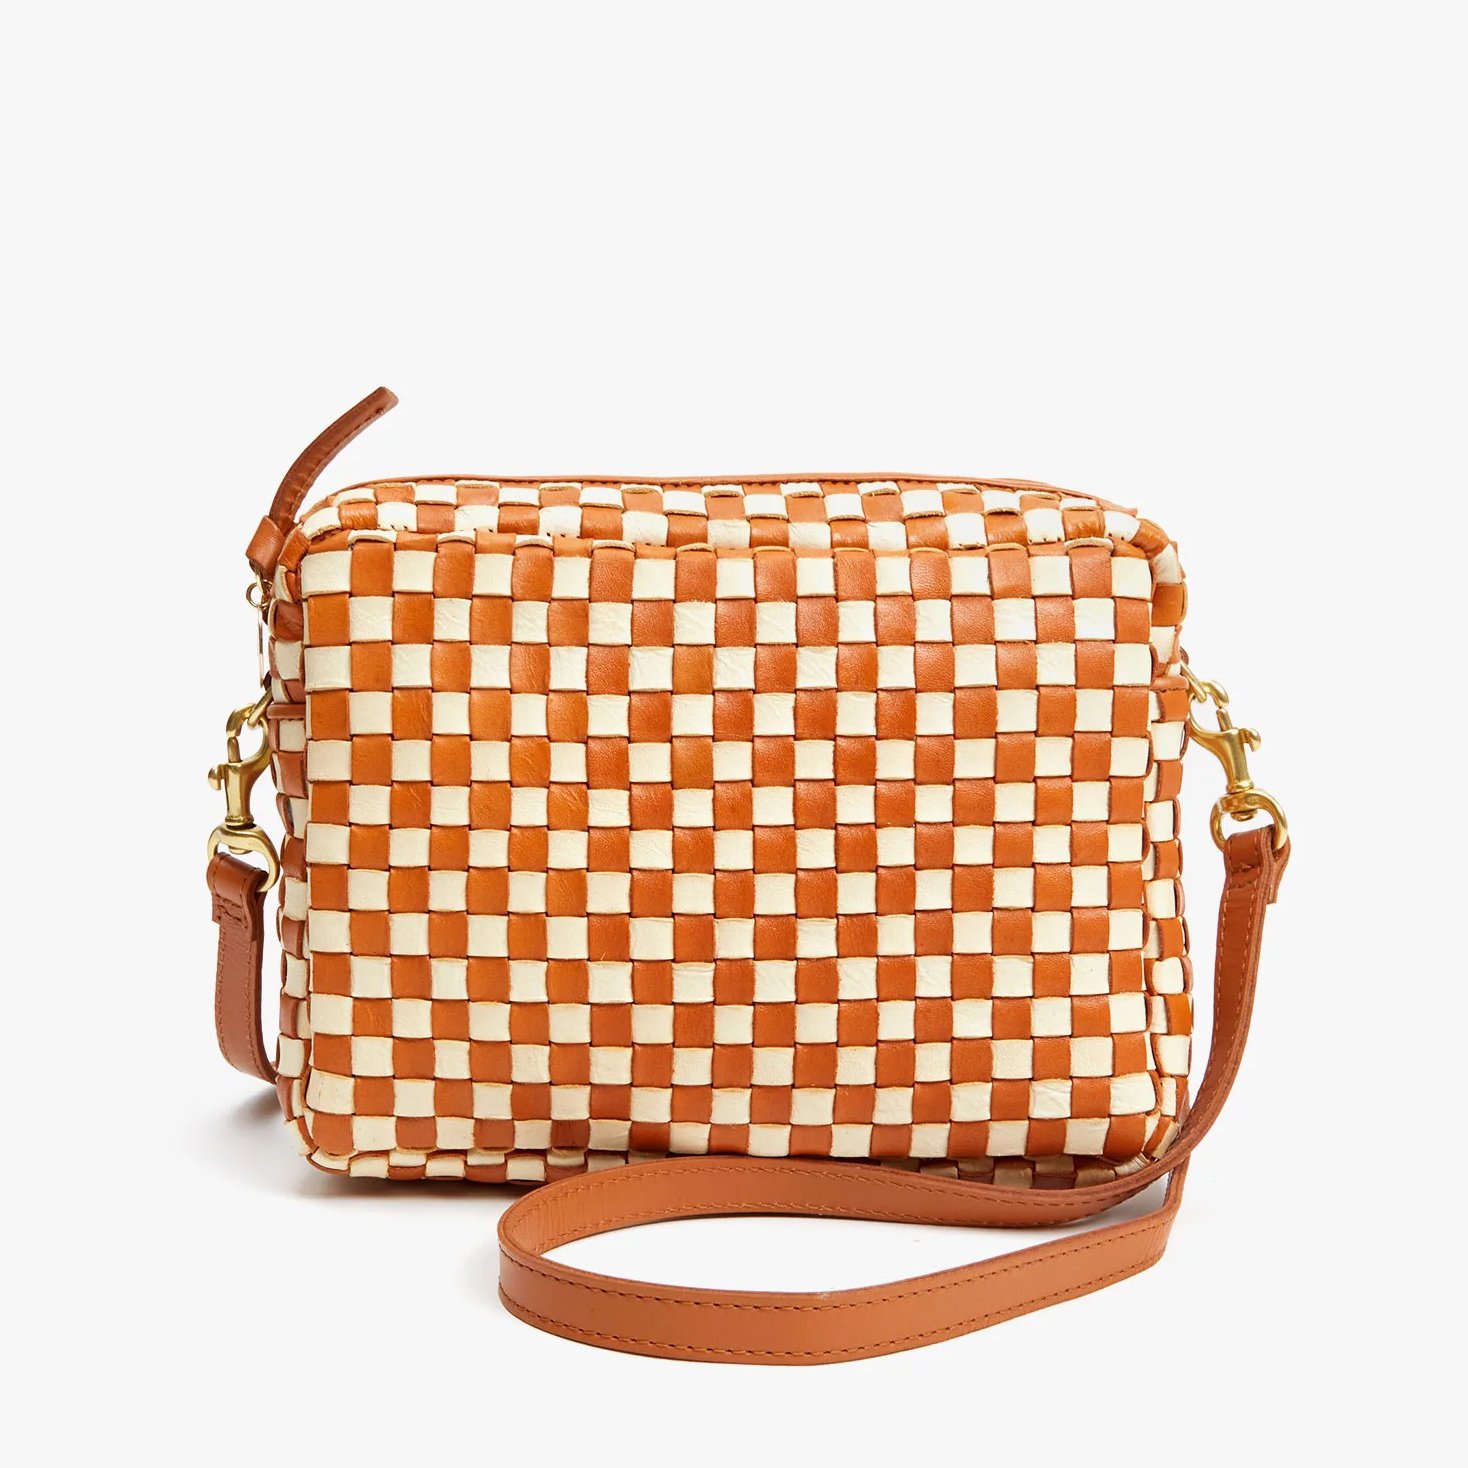 Save BIG on Midi Sac in Mist Woven Checker Clare V. . Get the top services  and products at reasonable prices